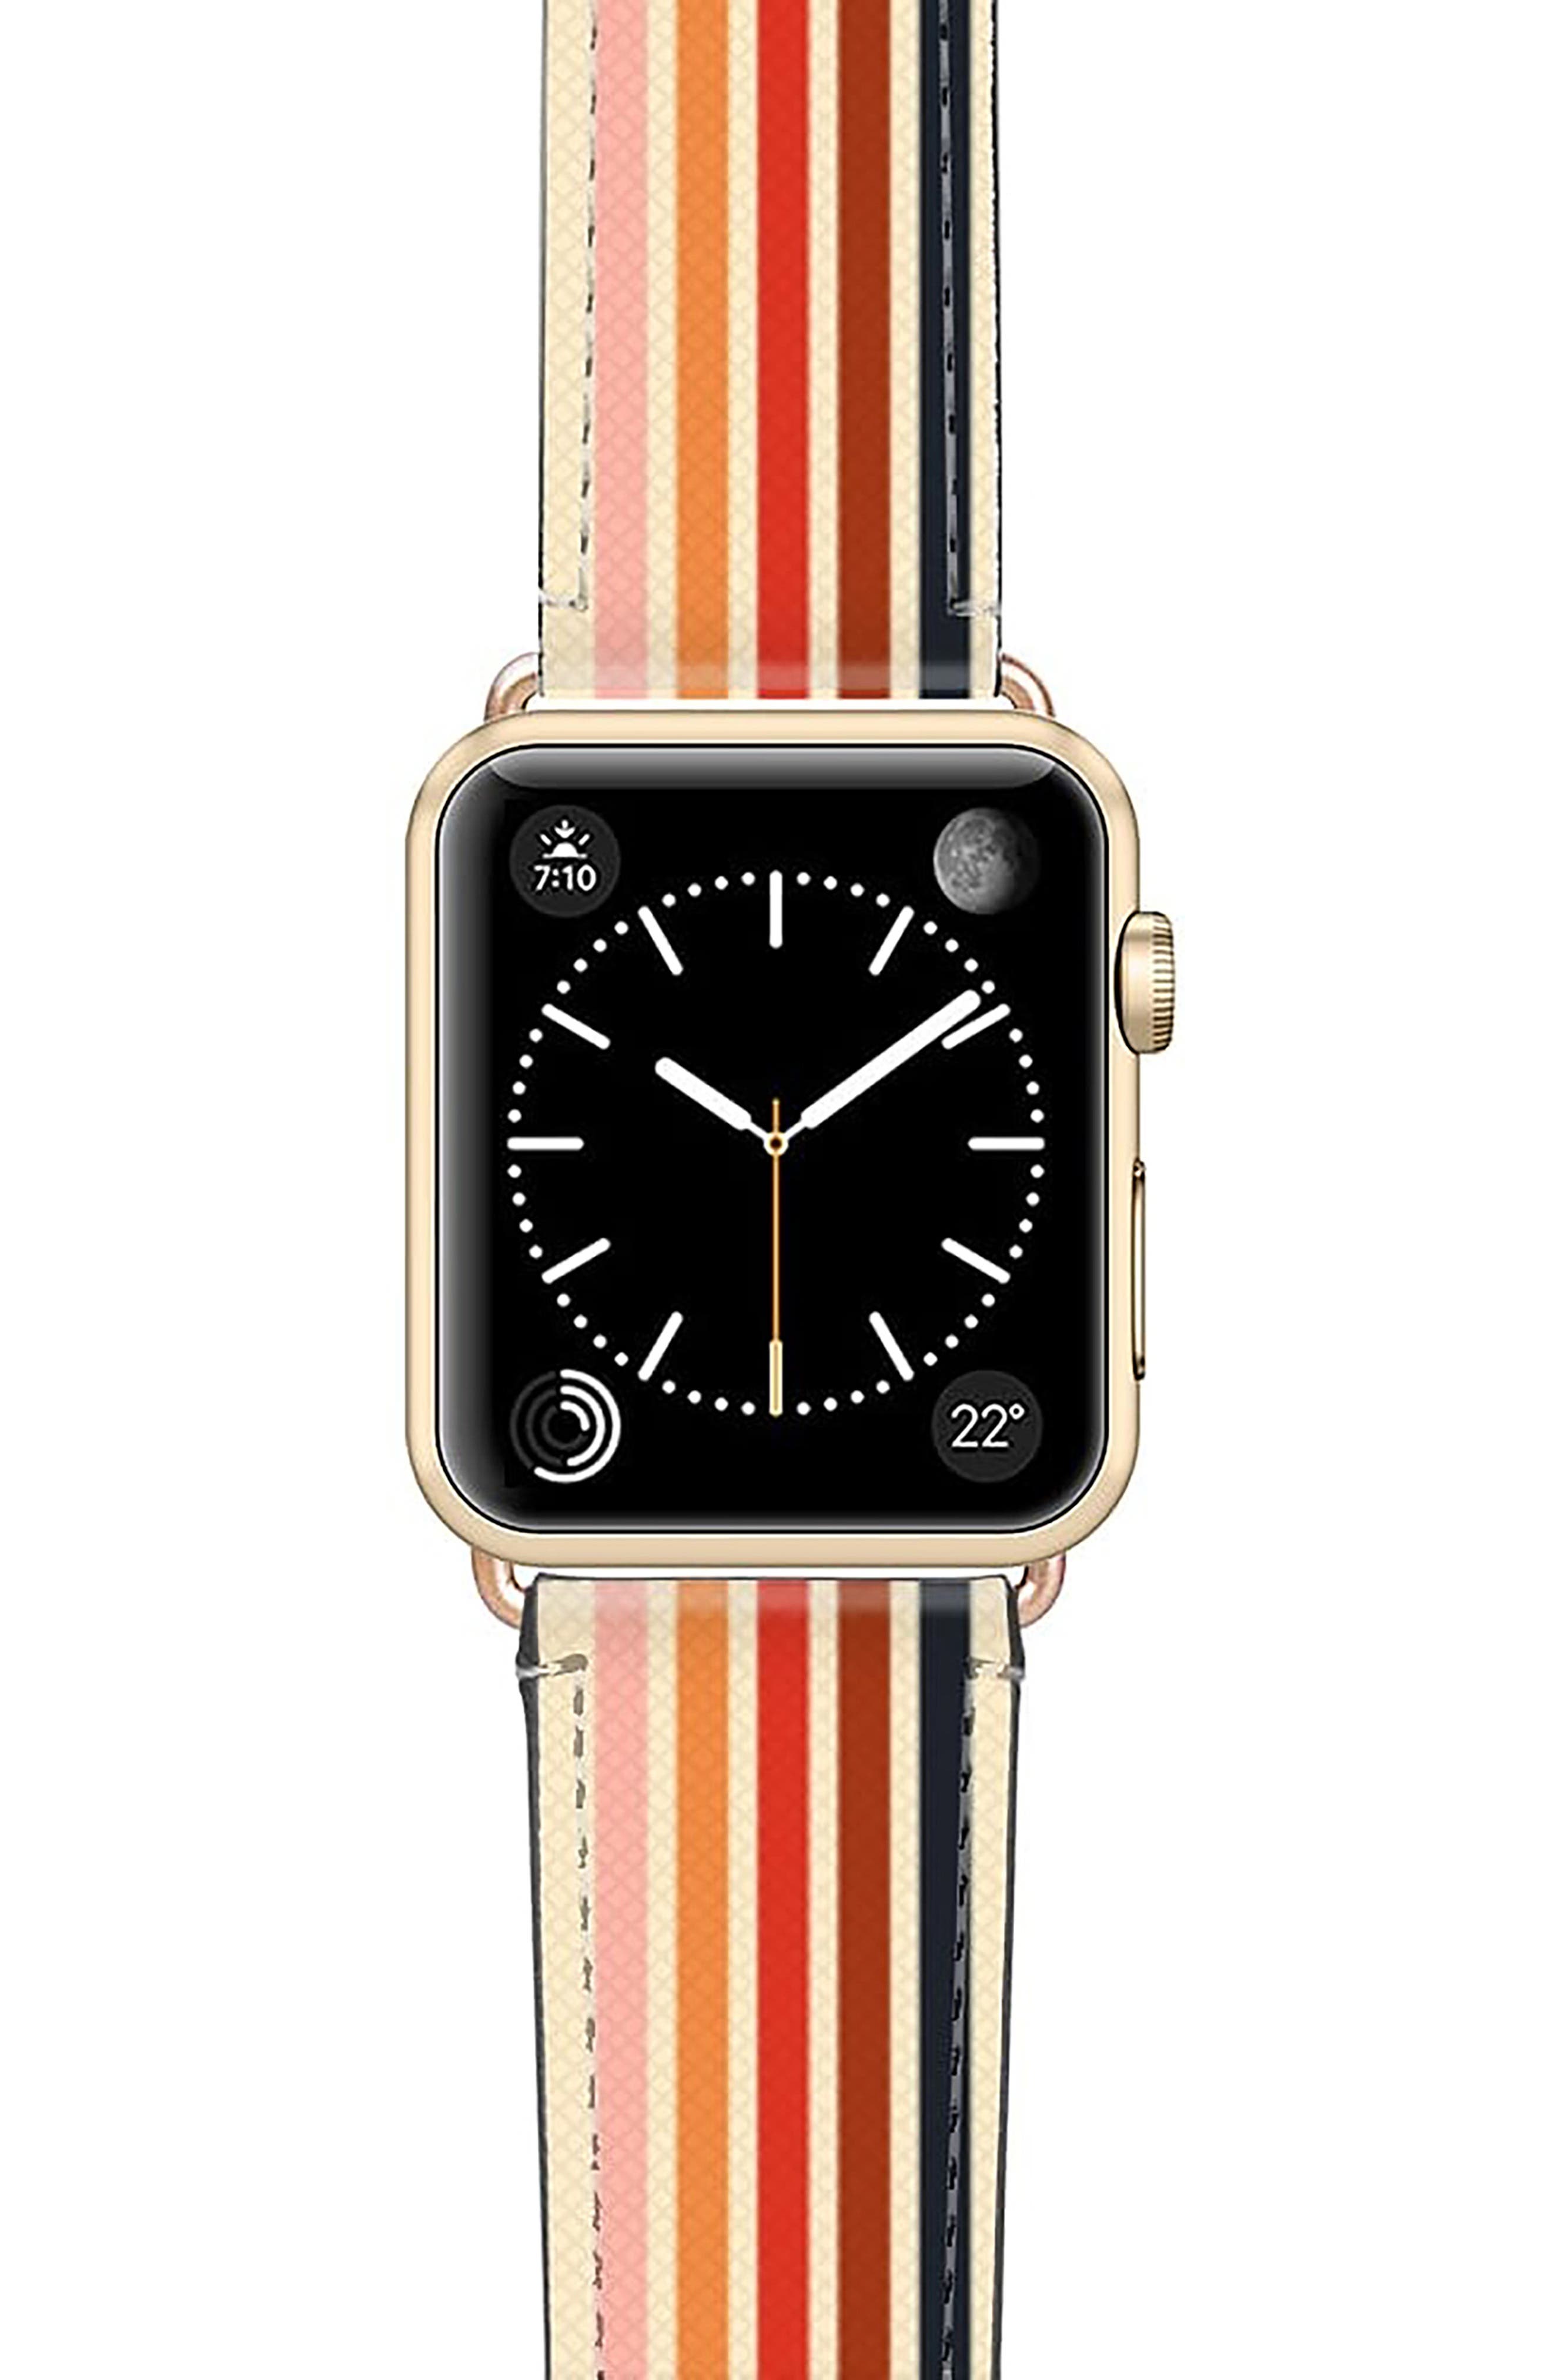 CASETiFY Retro Saffiano Faux Leather Apple Watch Band in Gold